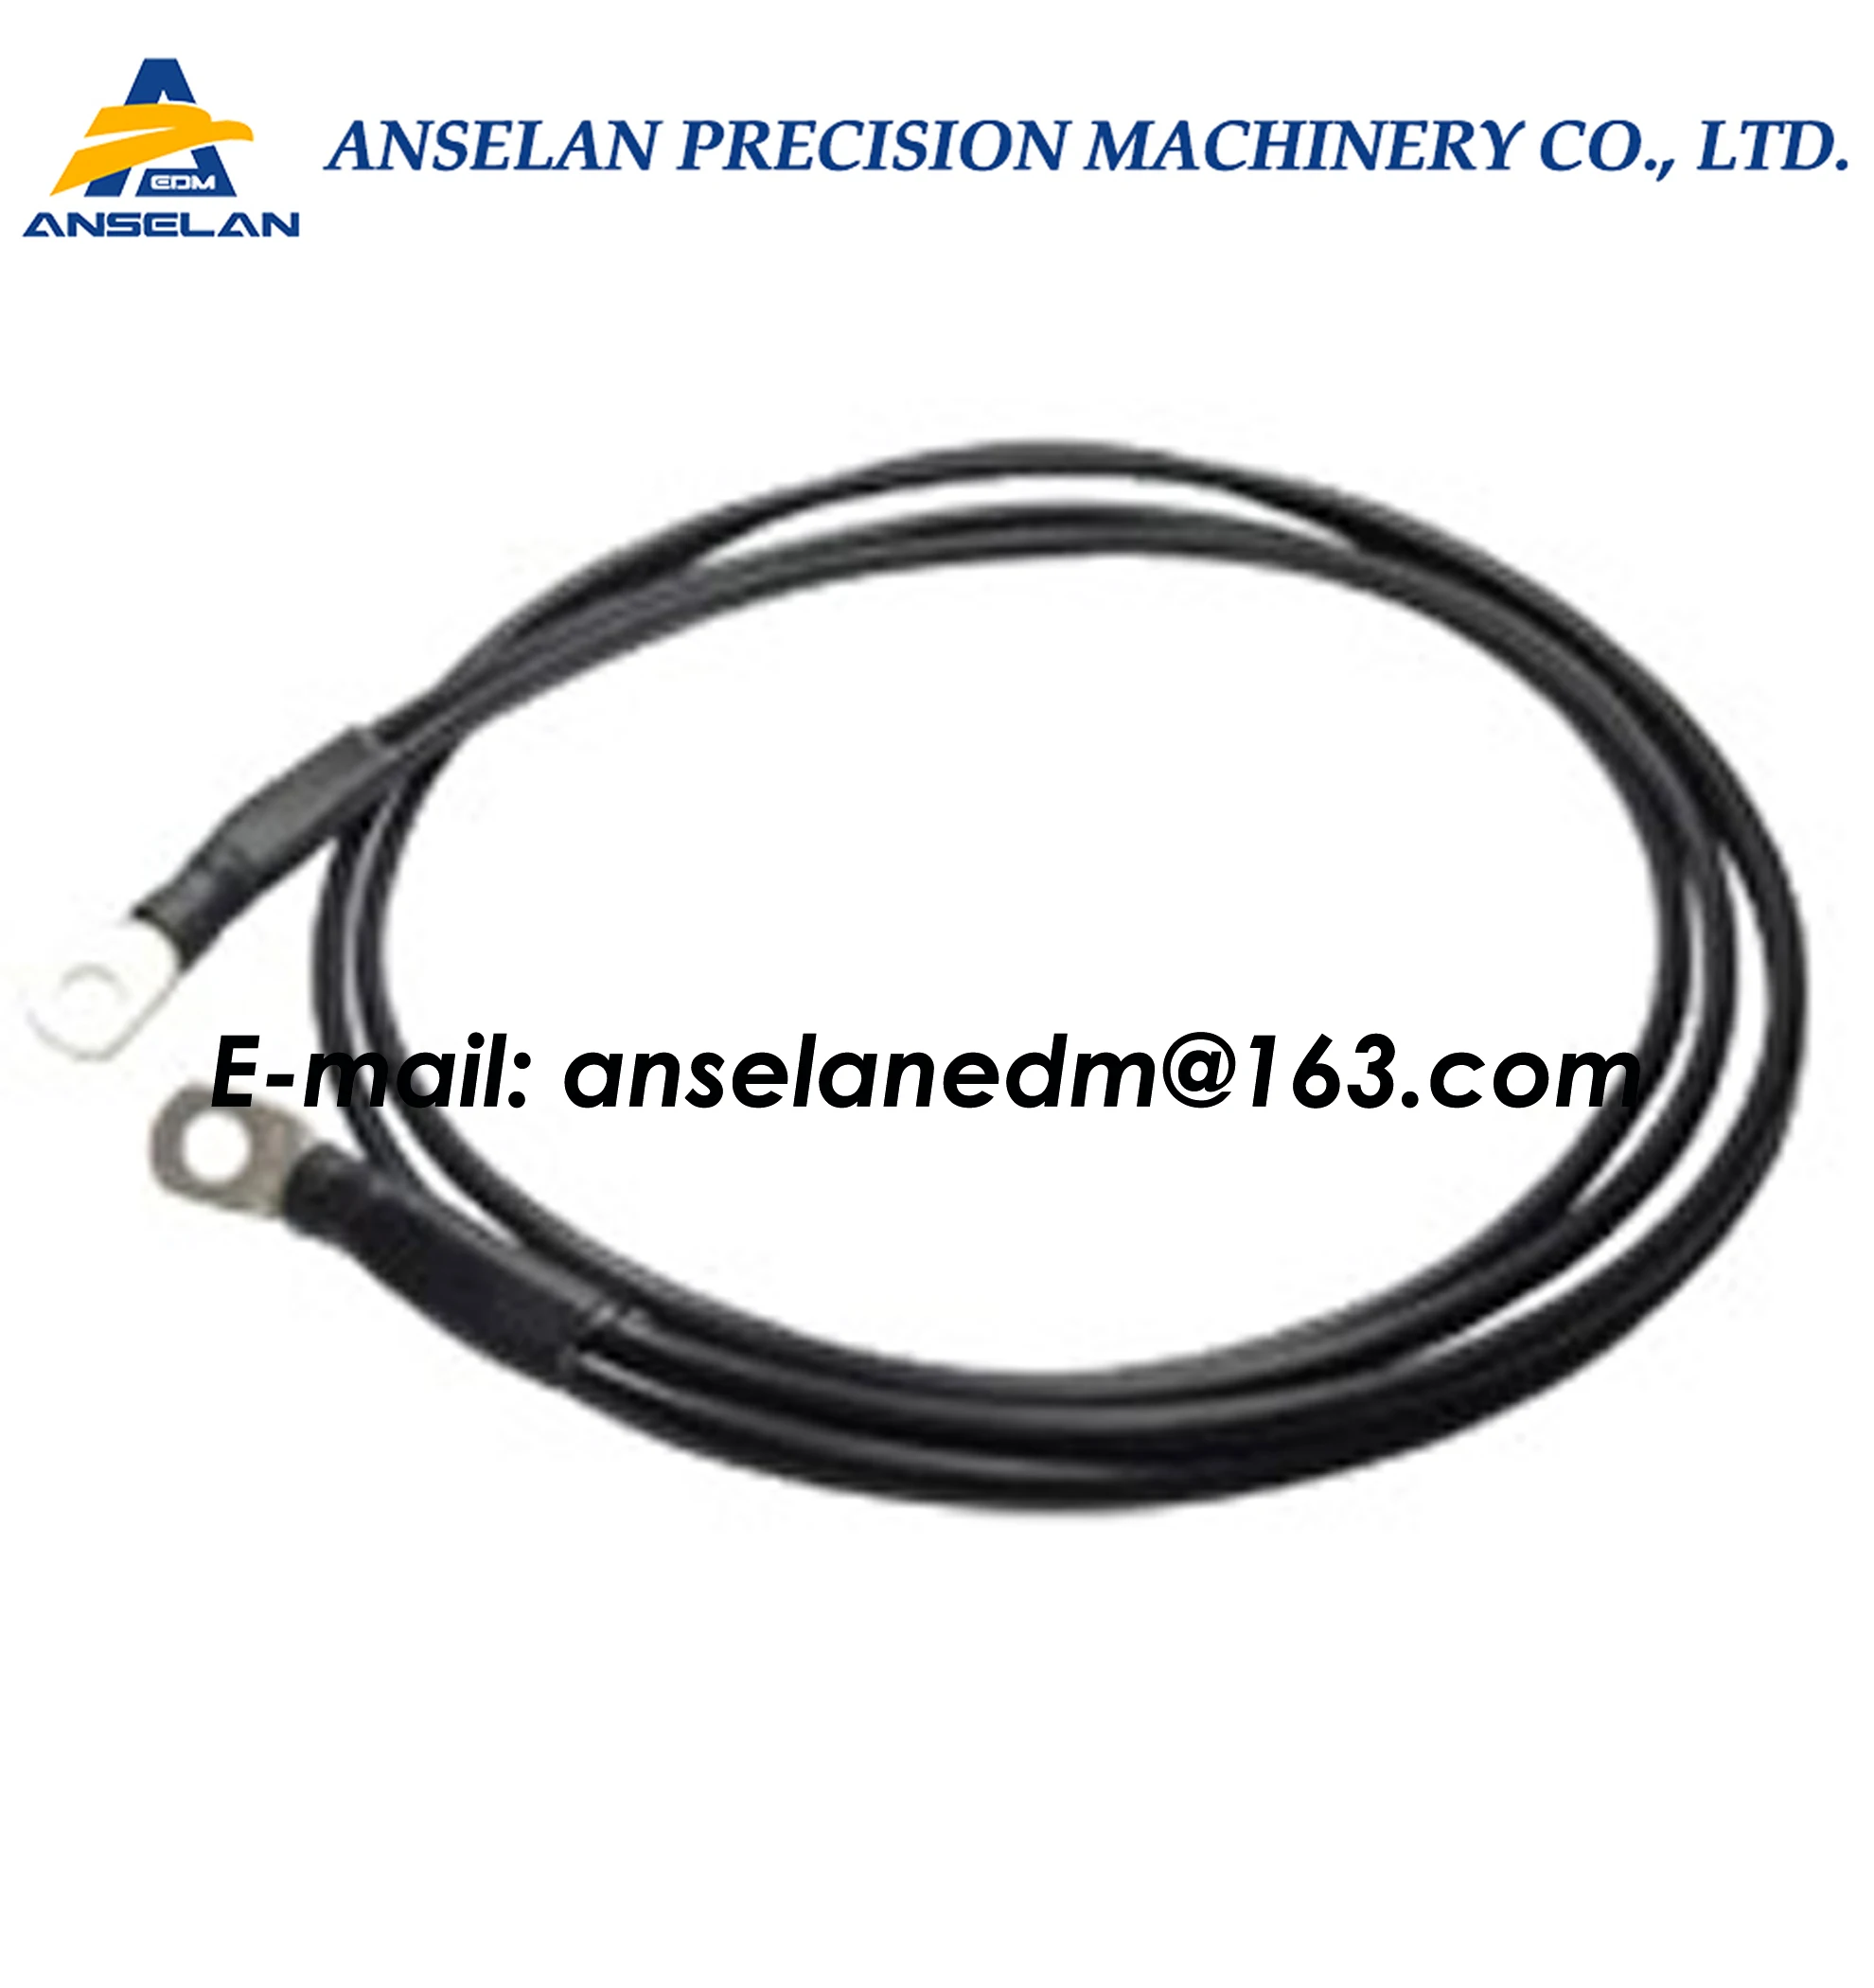 204462160 Ground Cable Upper Left L=950mm for ROBOFIL 2020. Charmilles C446216, 446.216, 446.216.0 edm Power Supply Cable 24.54.